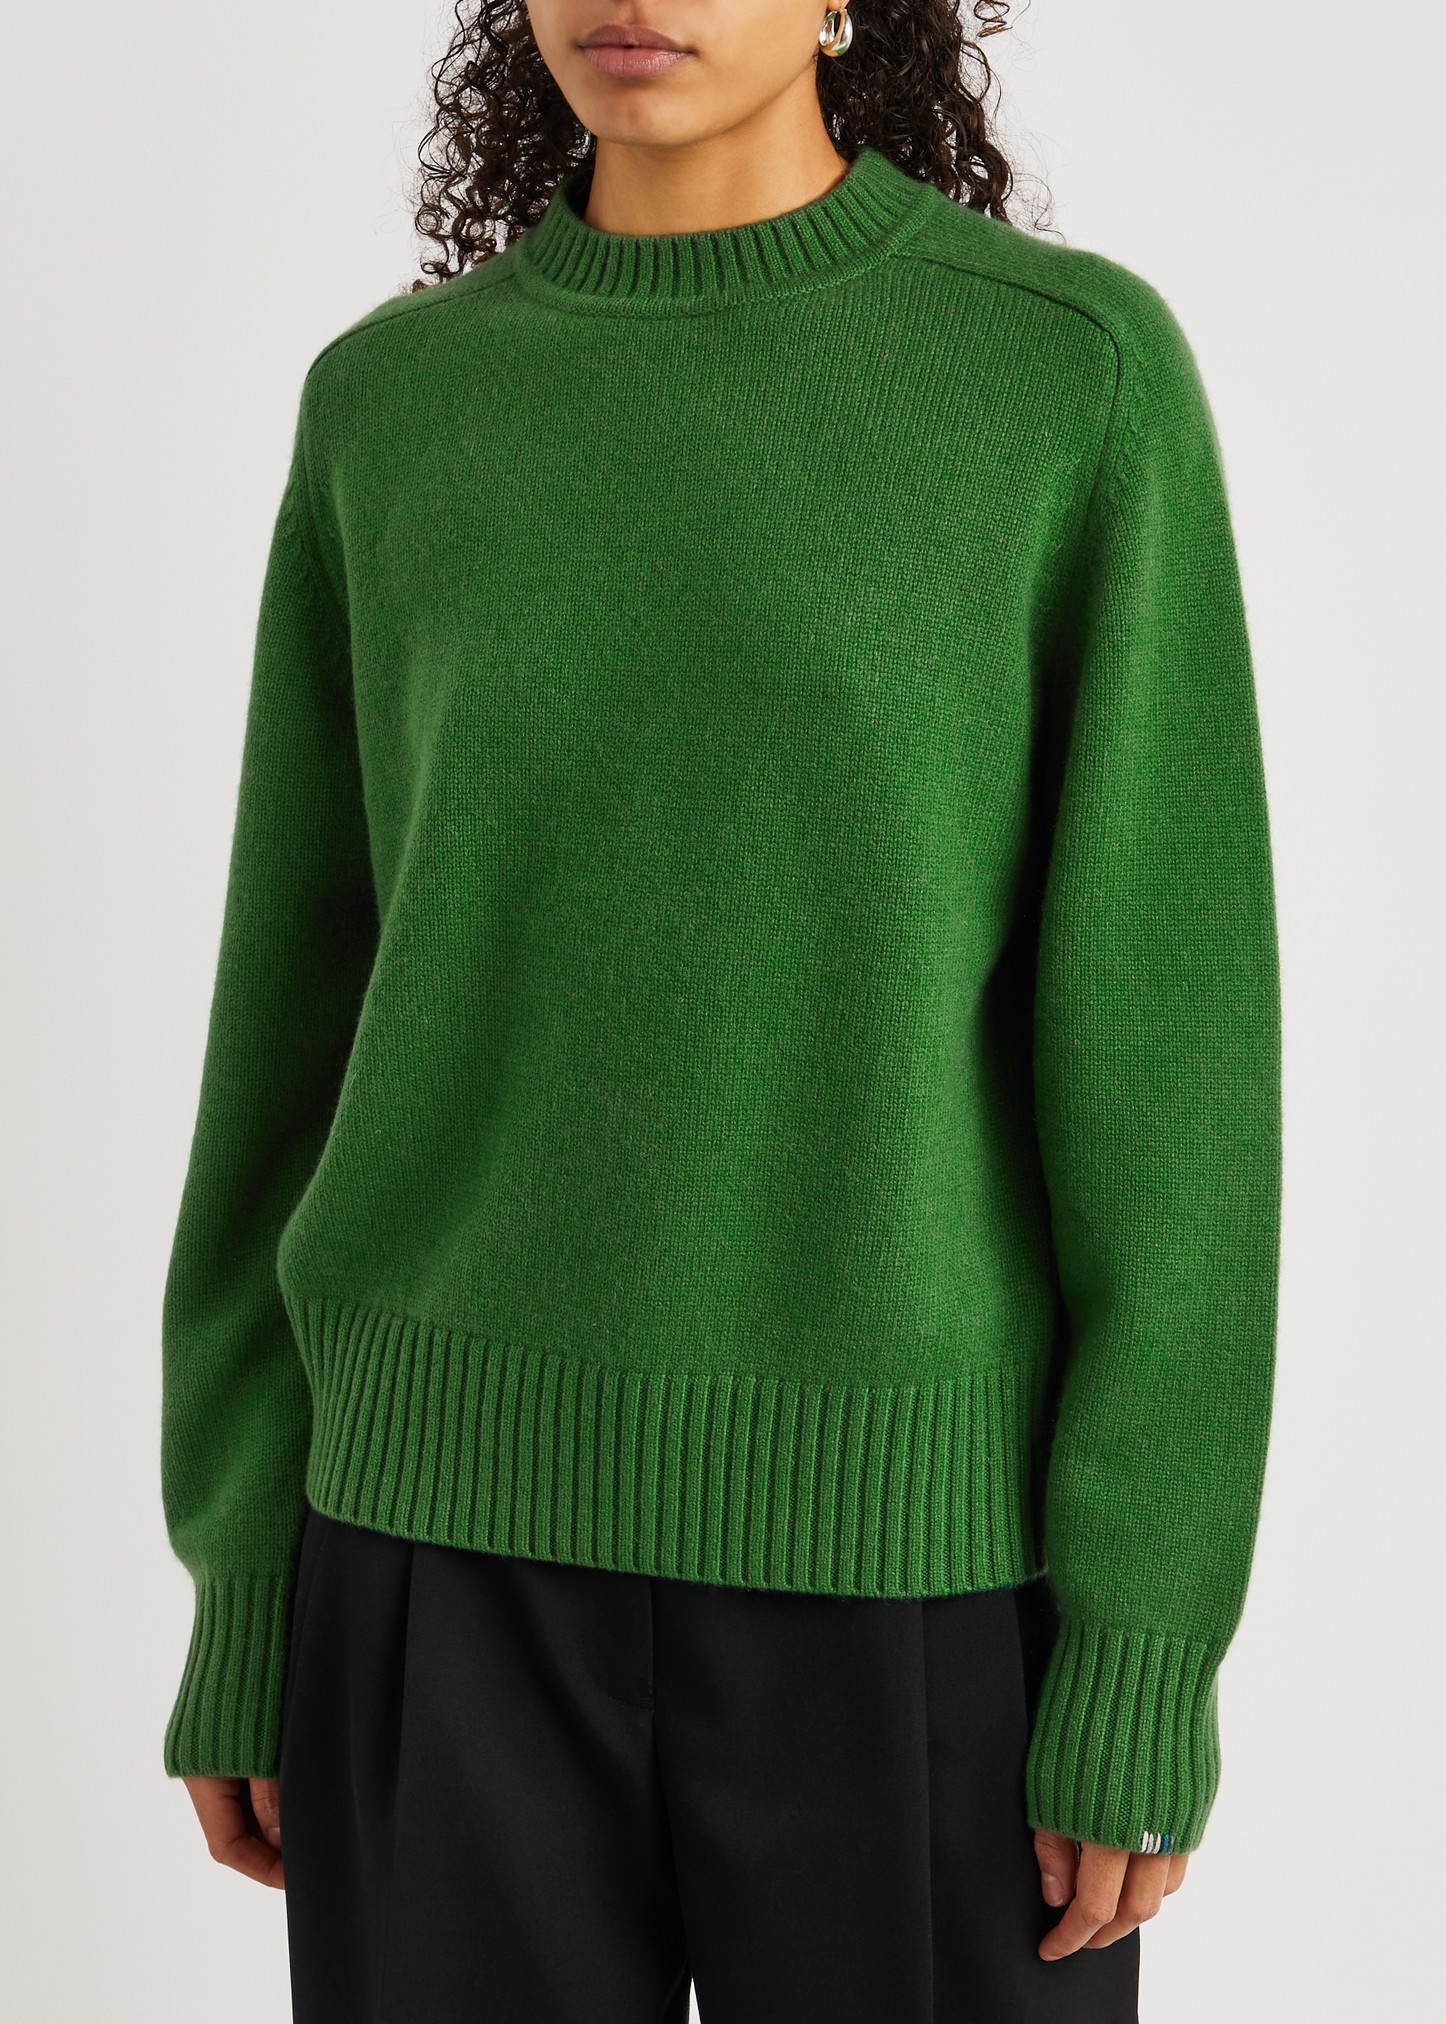 N°123 Bourgeois cashmere jumper - 2